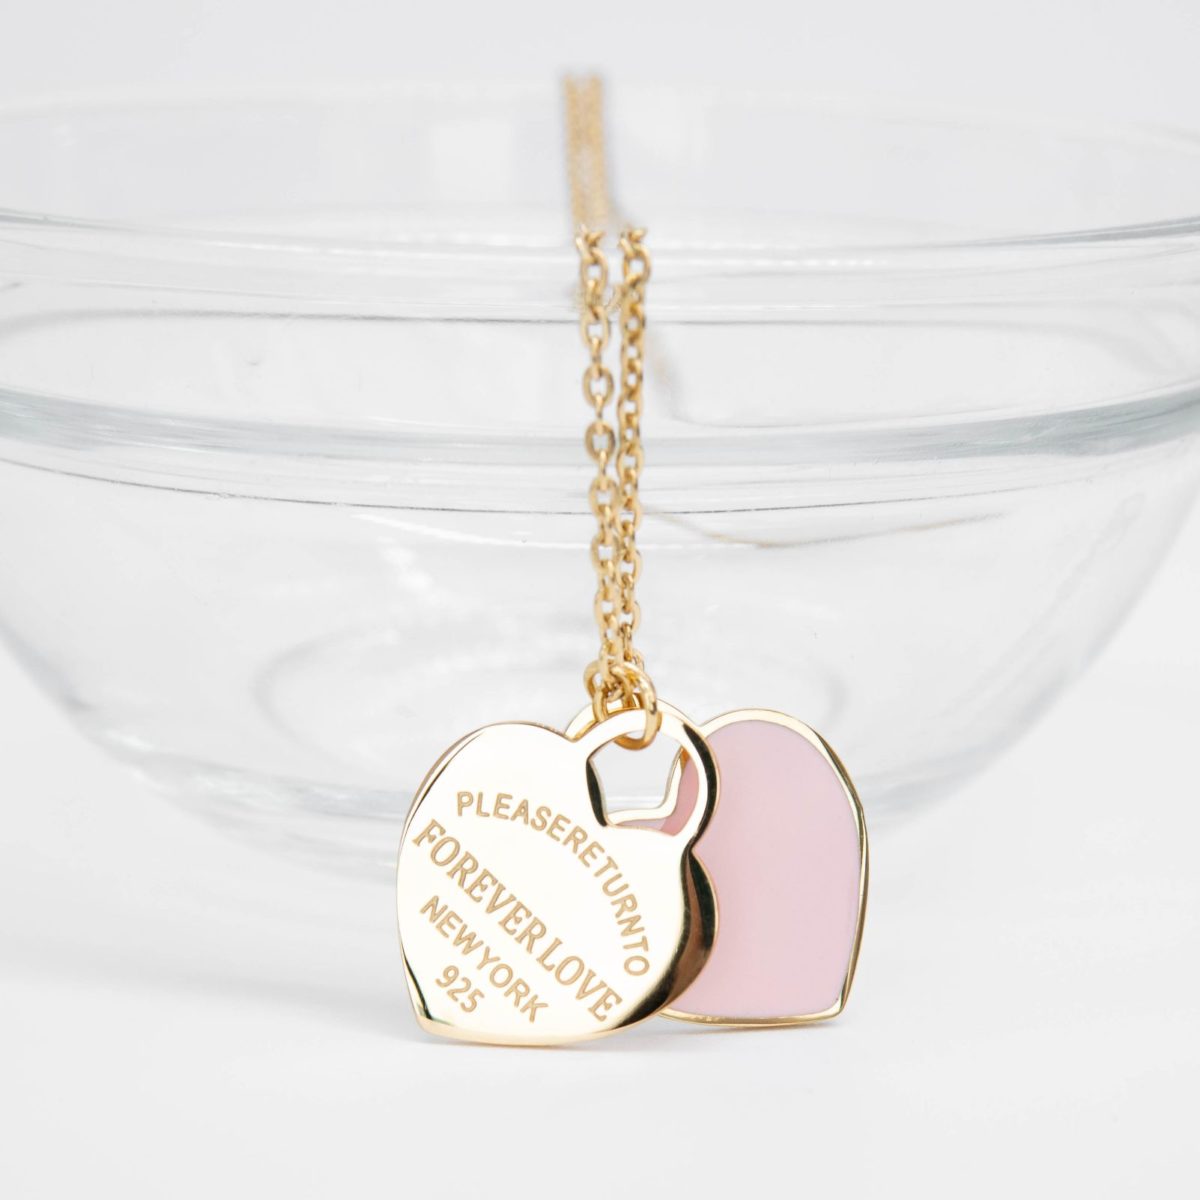 https://m.clubbella.co/product/theresa-gold-pink-enamel-necklace/ Theresa necklace - Pink Gold (5)